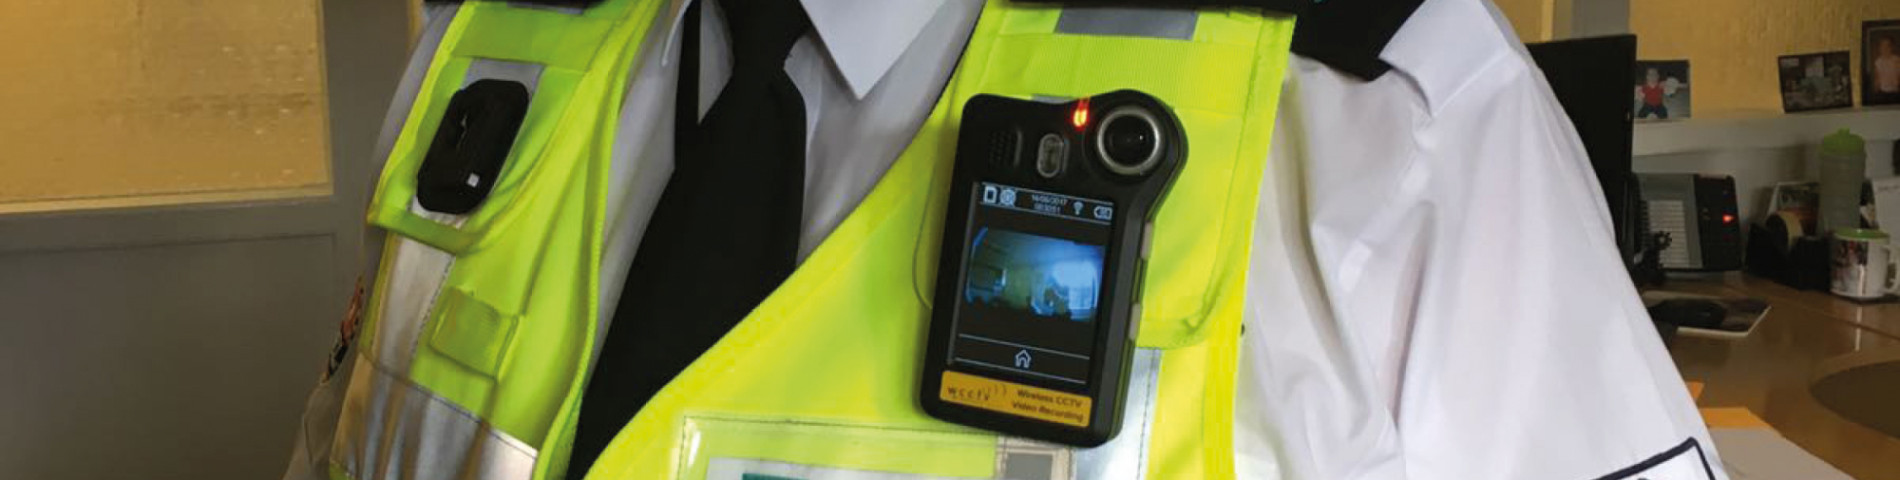 Body Worn Cameras for Local Authorities